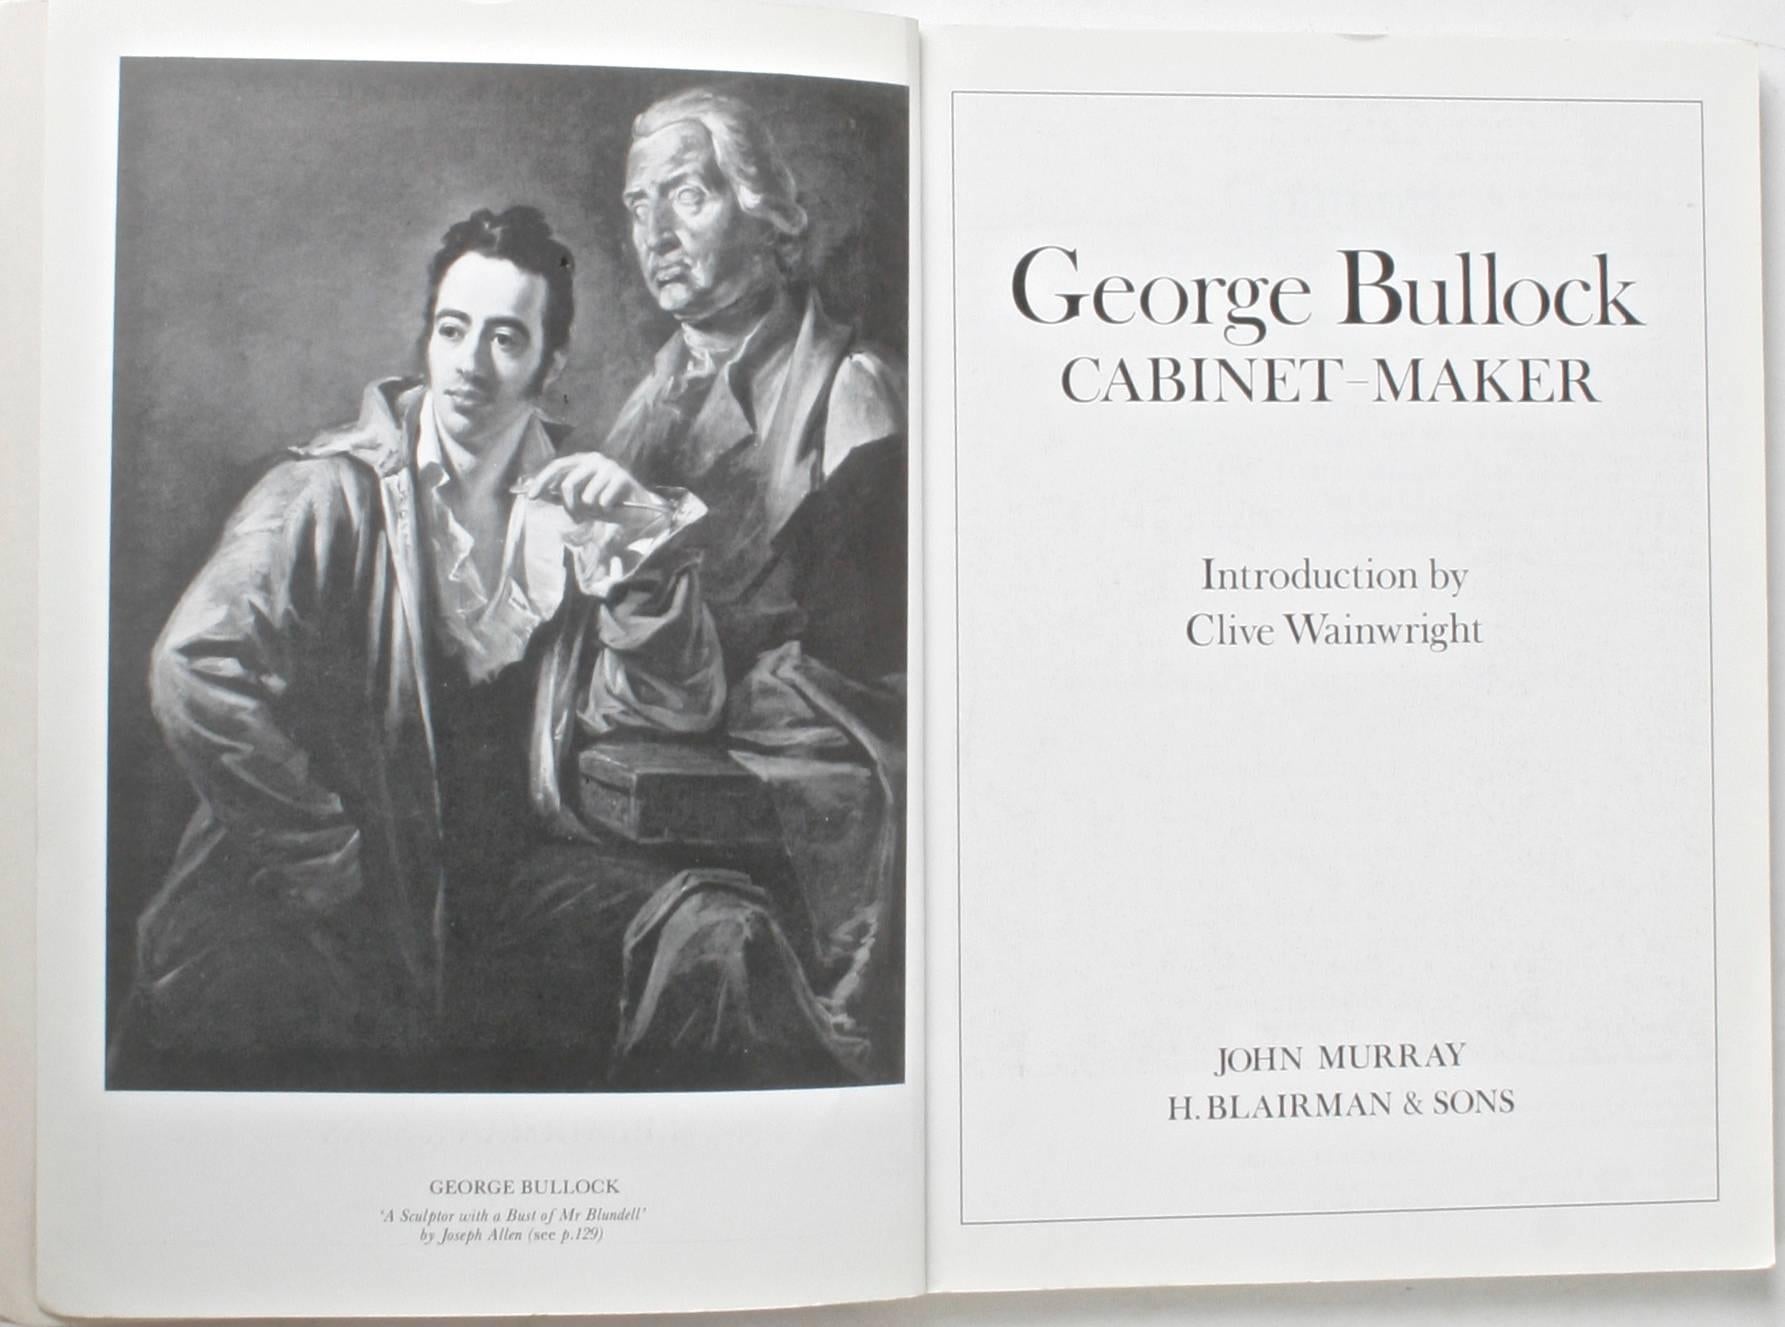 George Bullock: Cabinet-Maker. London: John Murray Ltd., 1988. First edition soft cover. 160 pp. Exhibition catalogue held in London and Liverpool from February 24th to March 26th, 1988. The catalogue has a comprehensive range for his furniture and